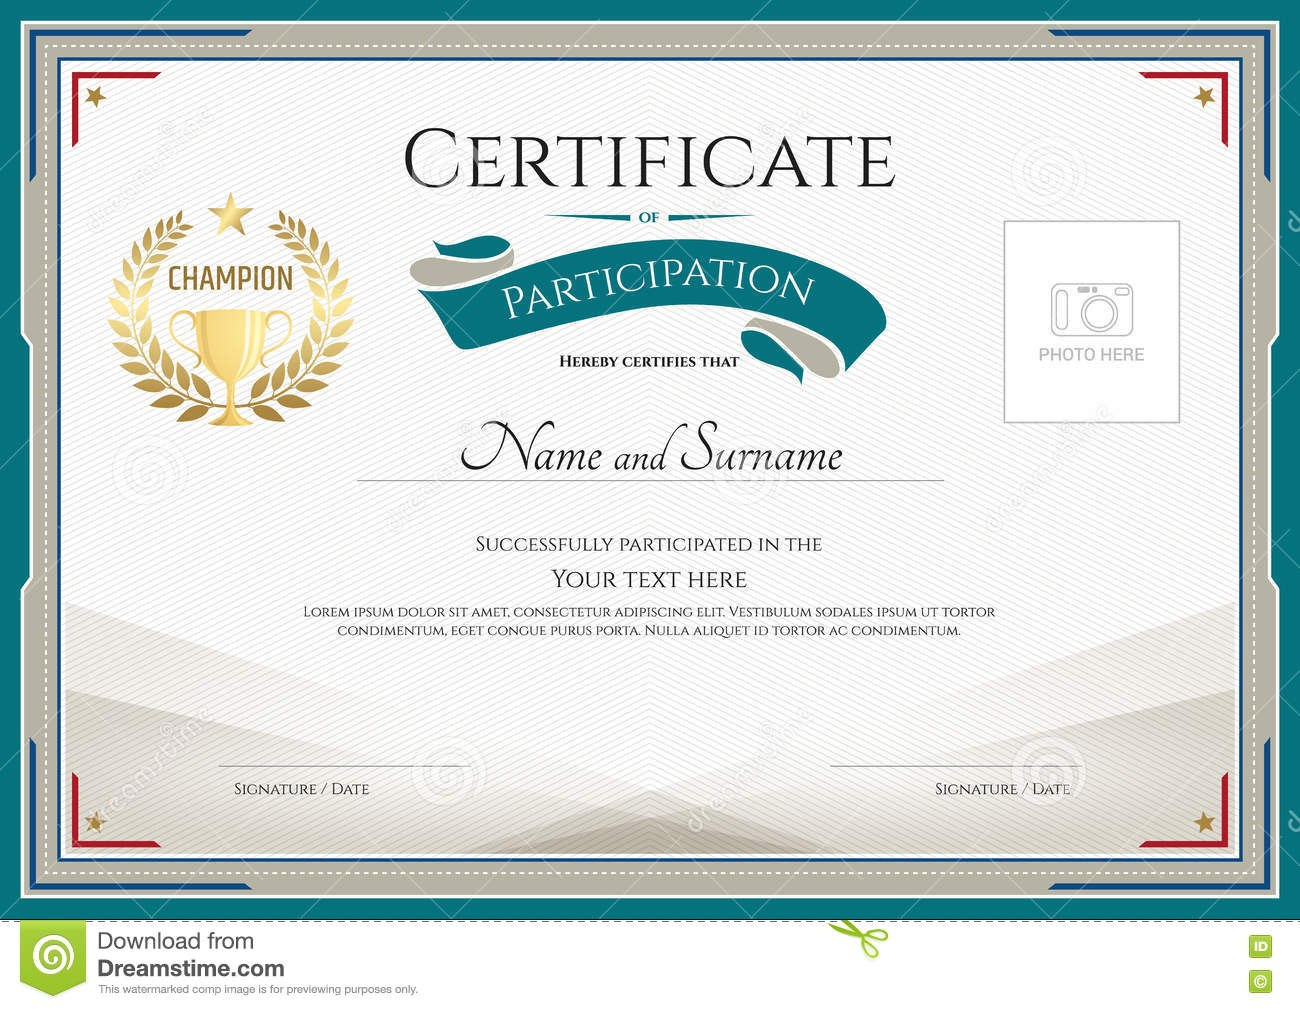 Certificate Of Participation Template With Green Broder Gold Tr with Participation Certificate Templates Free Download